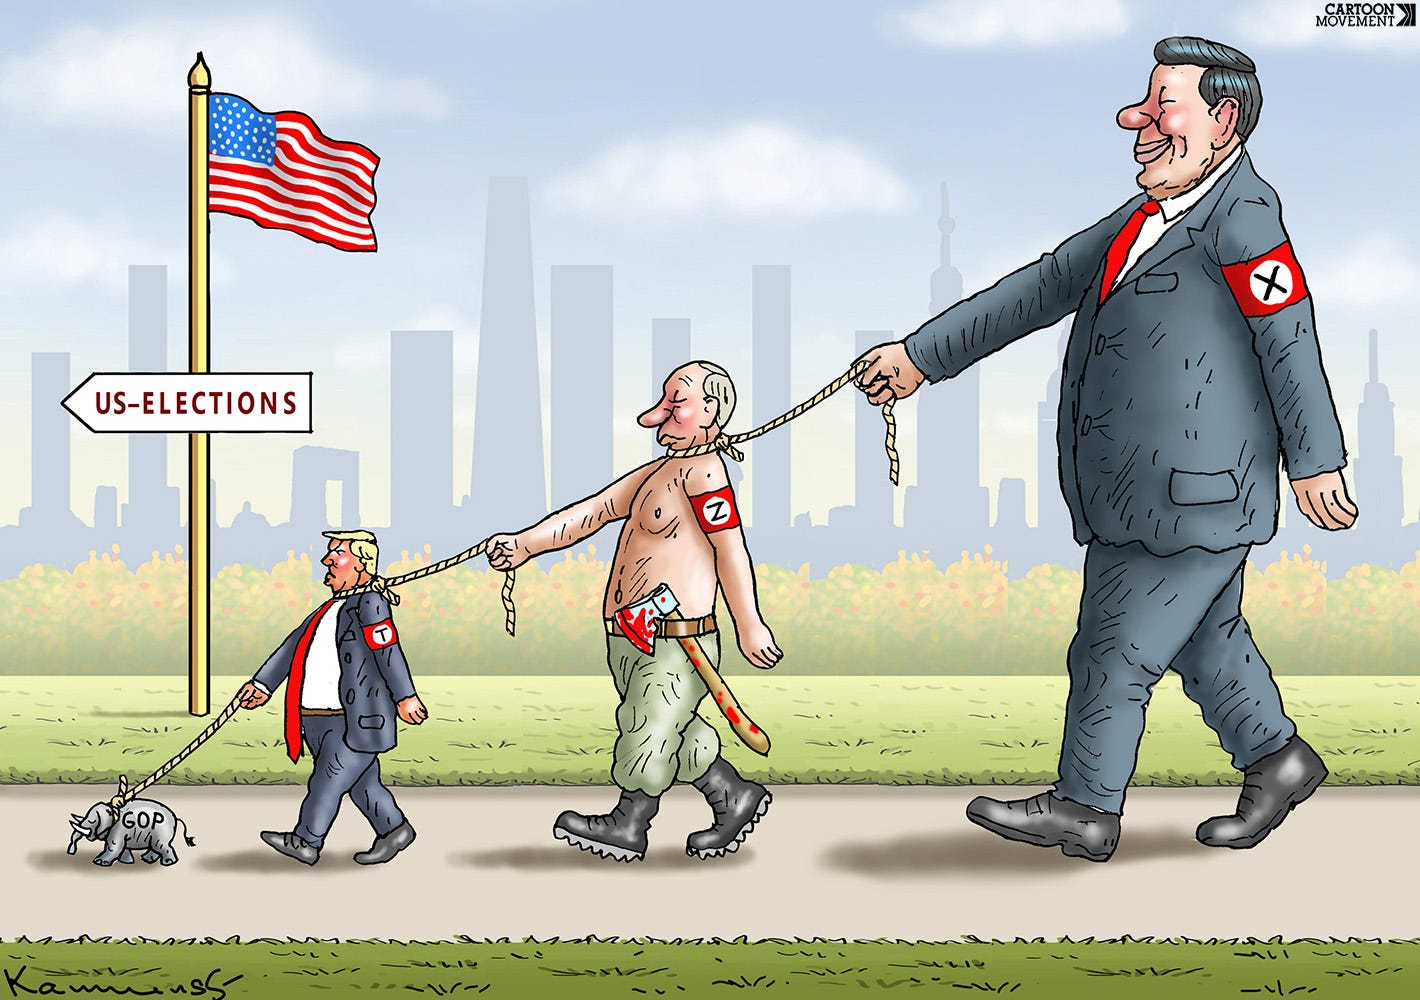 Cartoon showing Donald Trump who has a tiny elephant on a leash. Trump himself is on the leash of a bigger Putin, who is on a leash of an even bigger Xi Jinping. In the background we see the US flag and a sign that says "US elections".